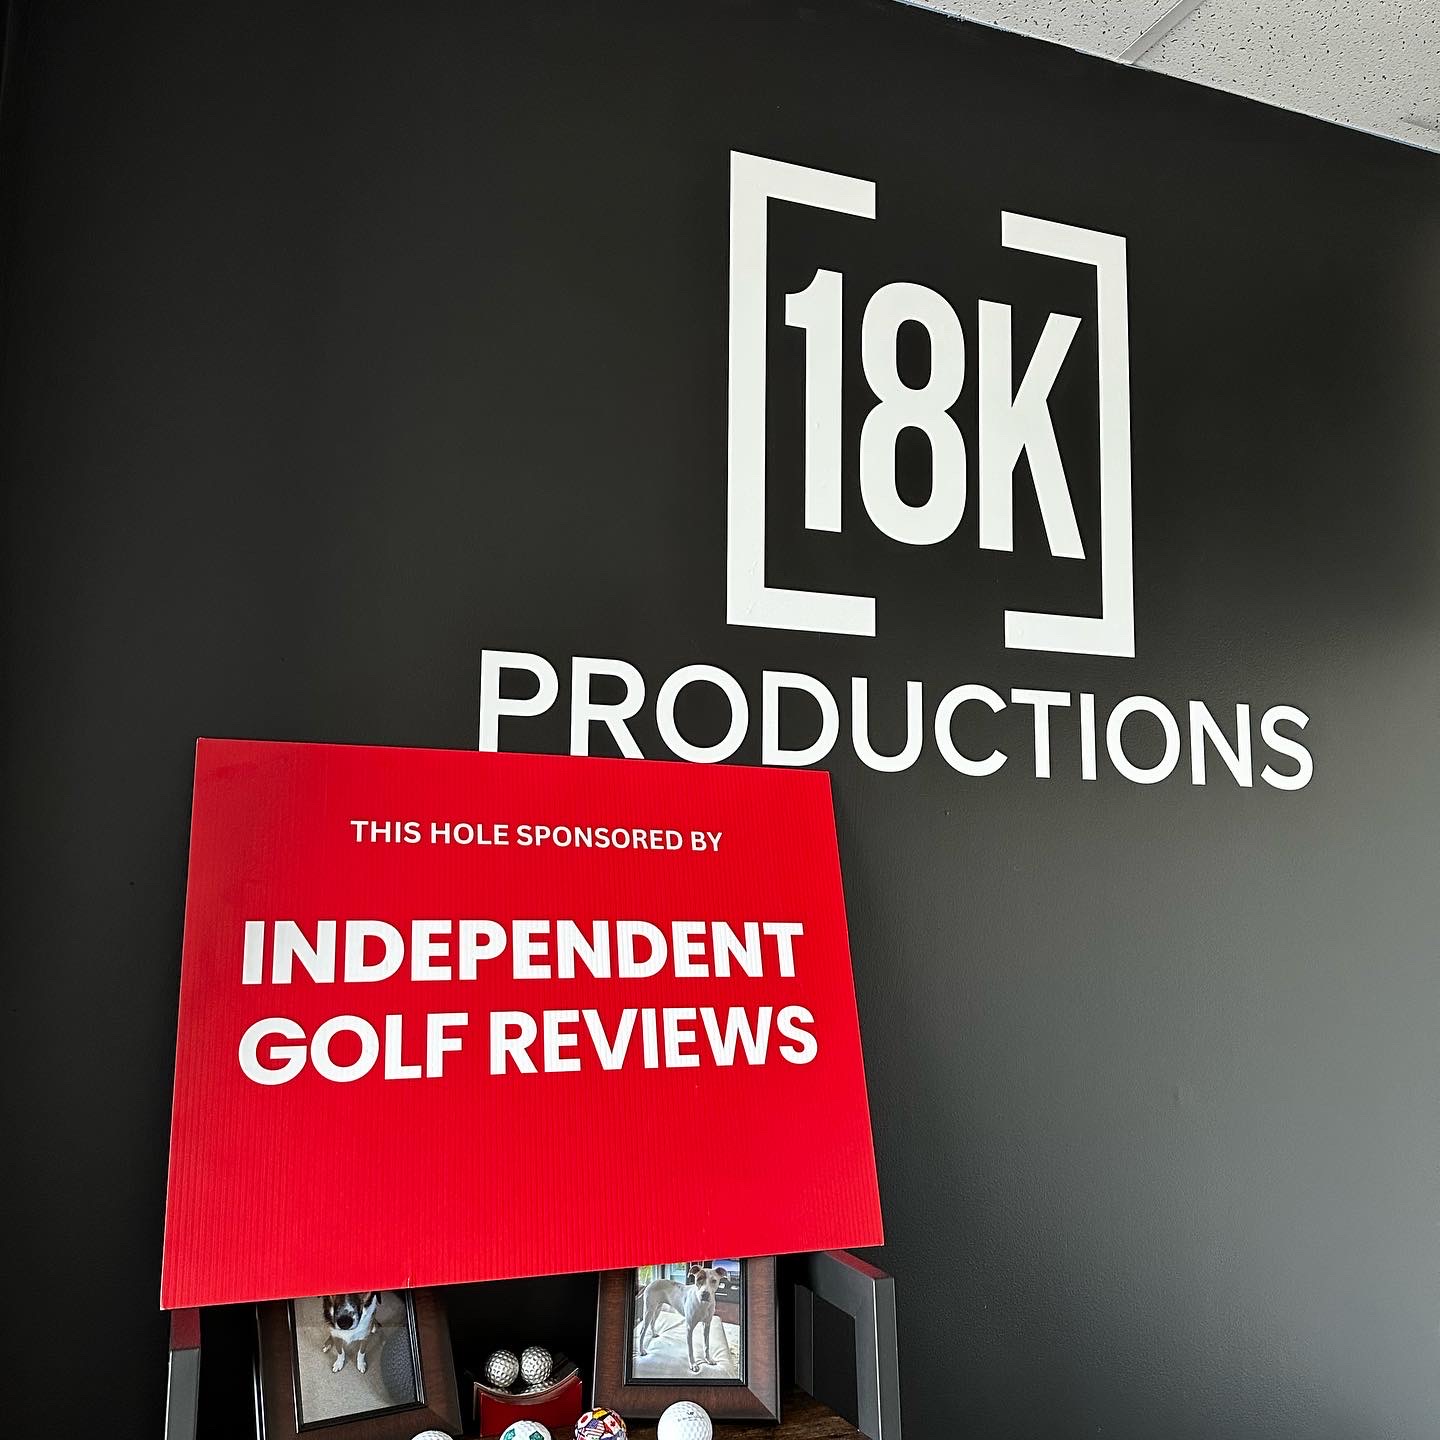 independent golf reviews sign in 18k productions office